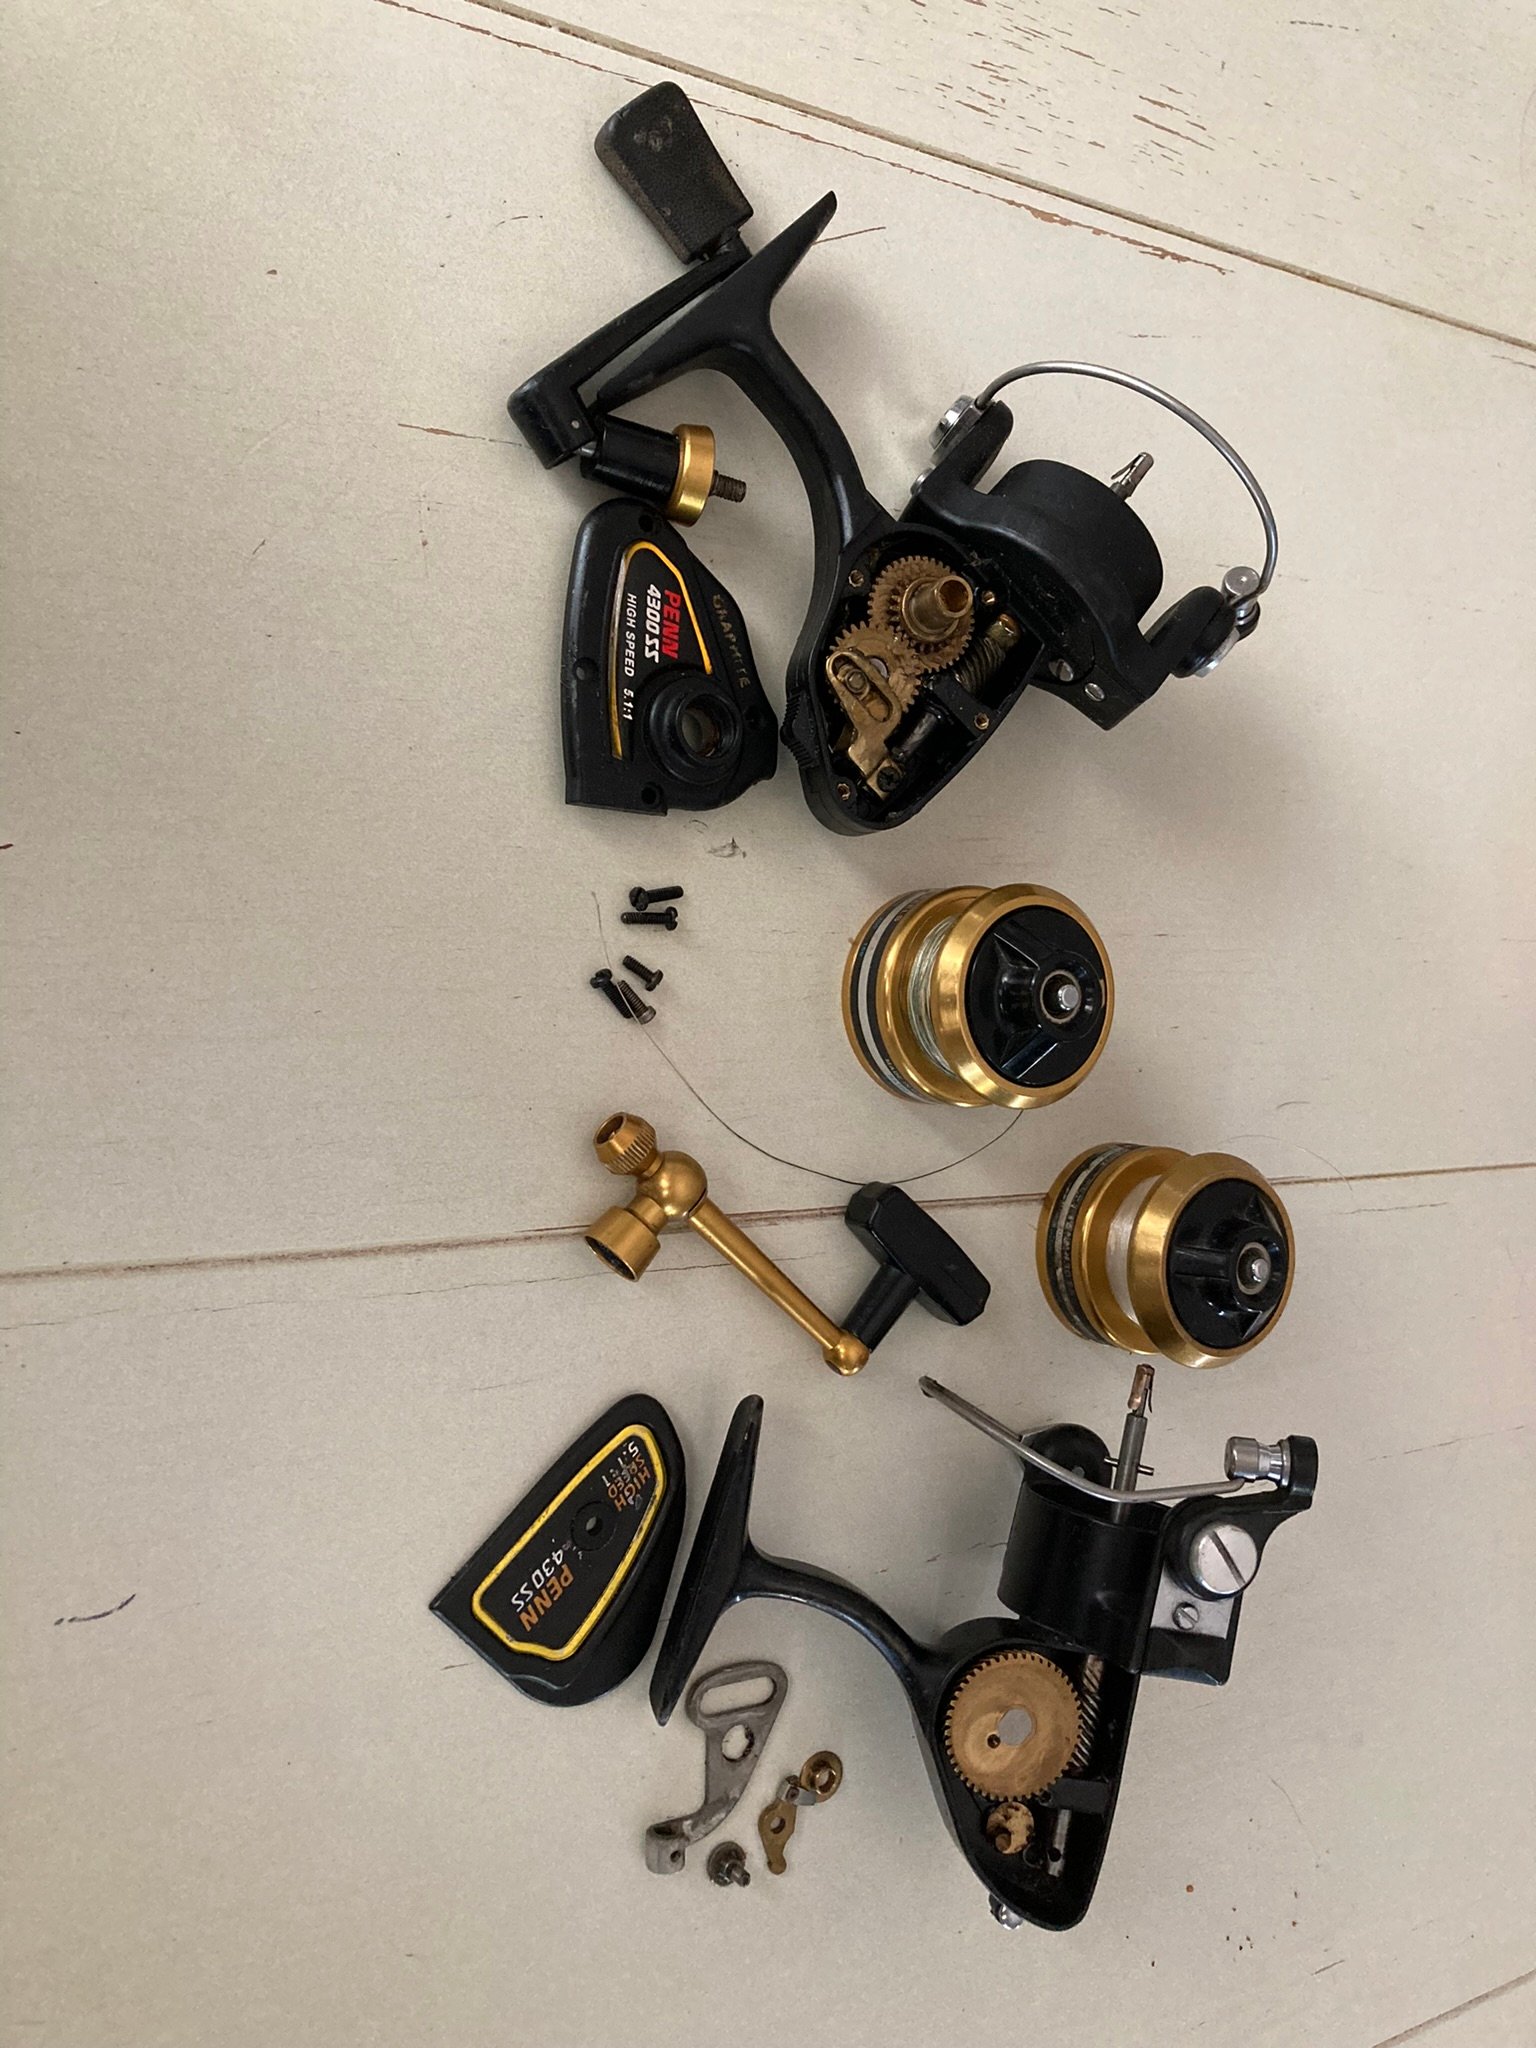 2 Penn reels for parts - Classified Ads - Classified Ads